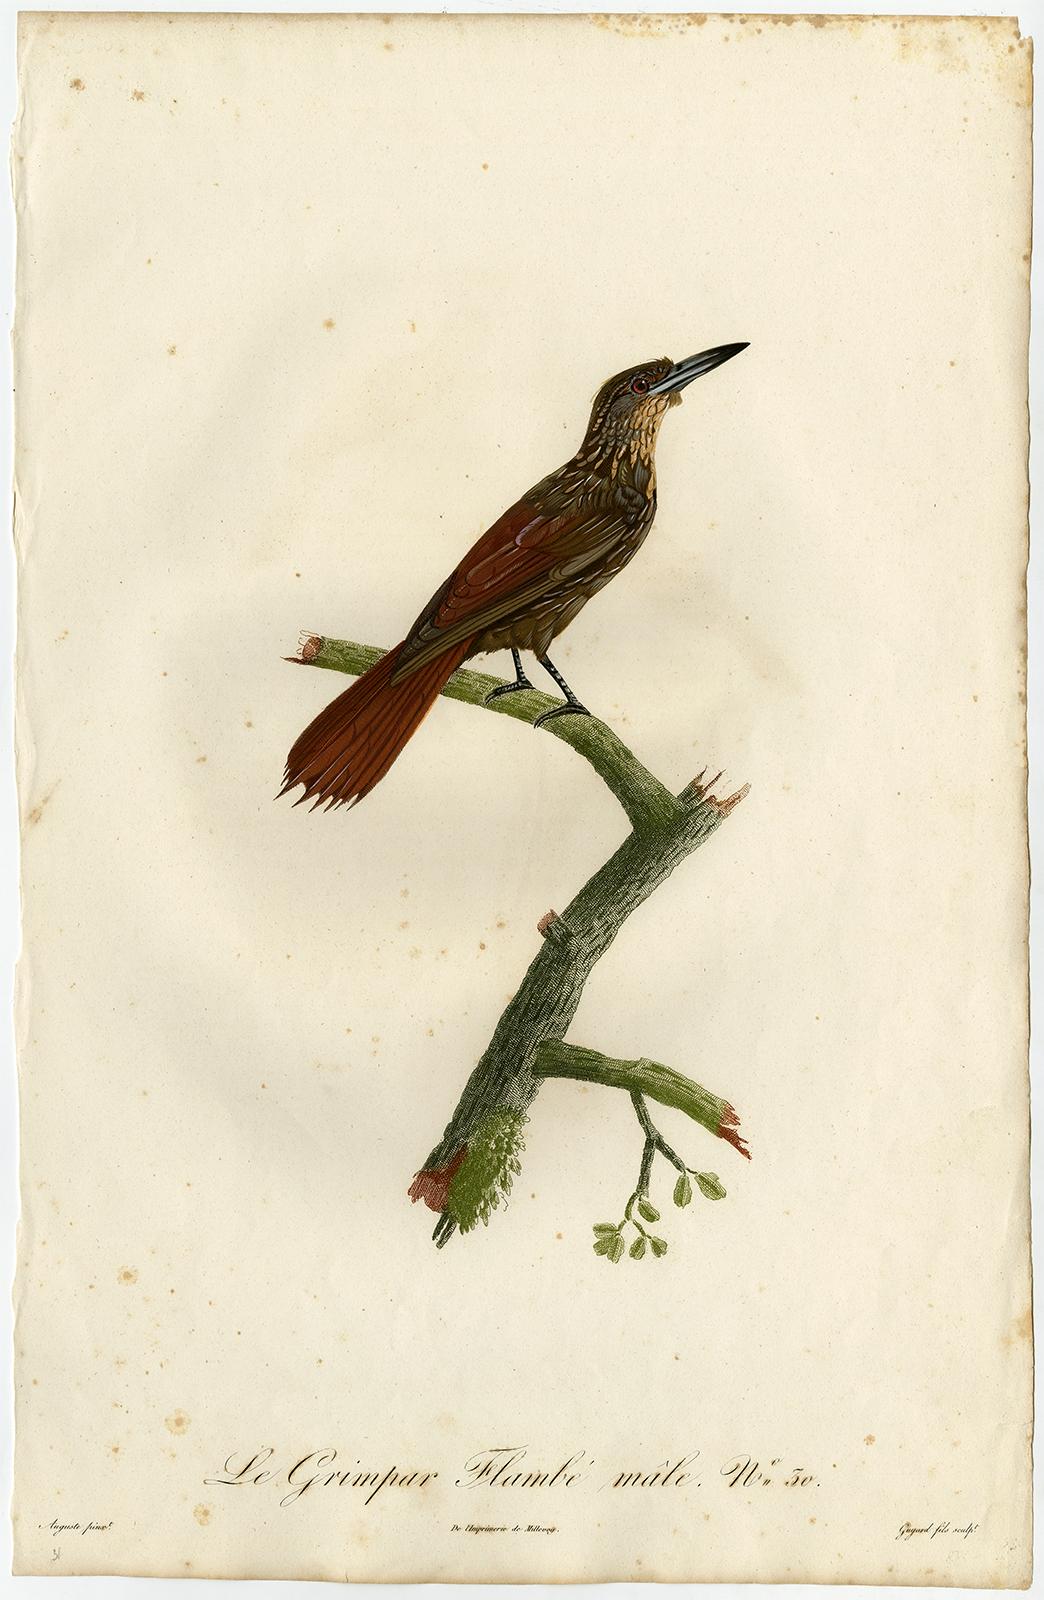 Jacques Barraband Animal Print - Male chestnut-rumped woodcreeper by Barraband - Hand coloured etching - 19th c